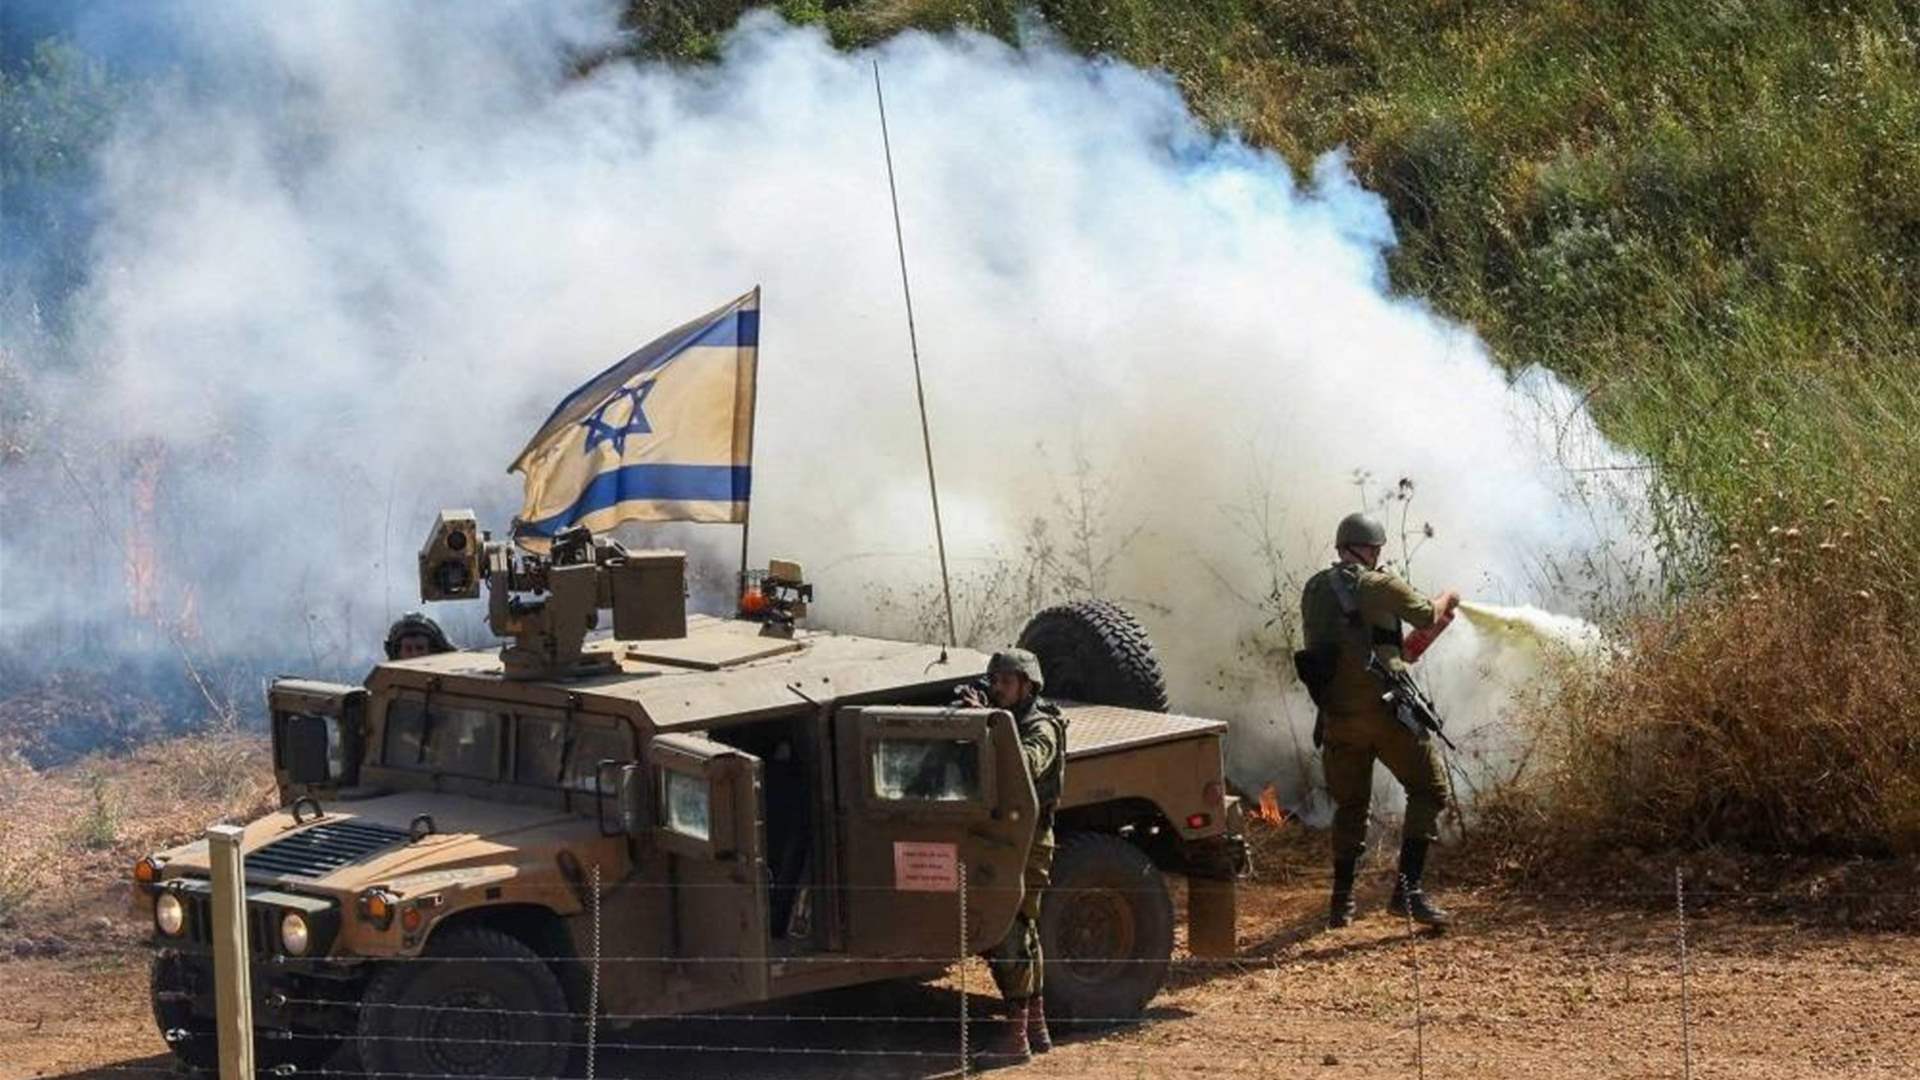 Israel&#39;s internal dispute: Israeli army prepares for battle on northern front with Lebanon amid prisoner deal negotiations